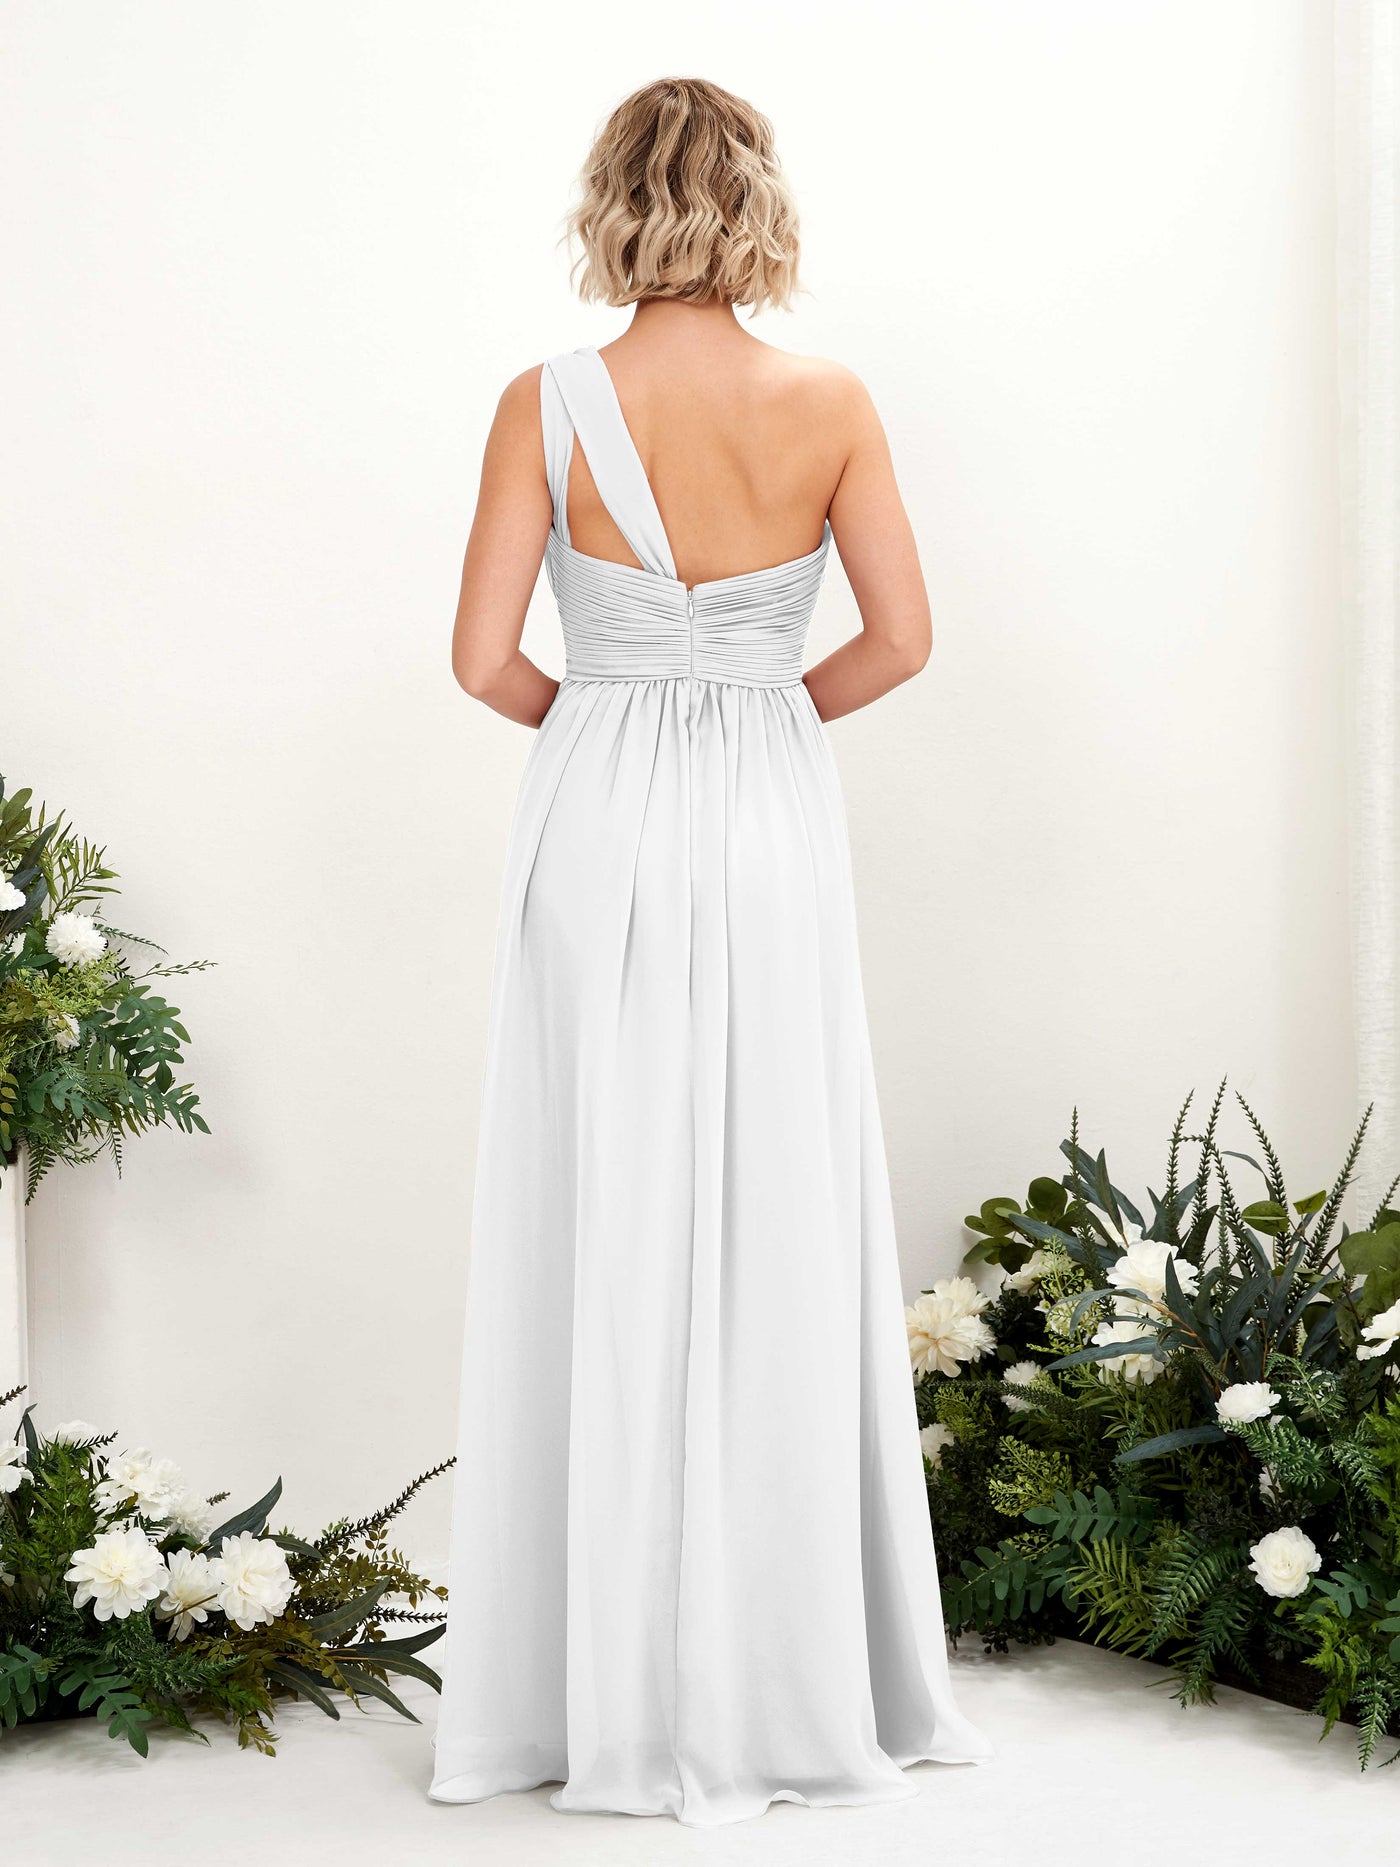 White Bridesmaid Dresses Bridesmaid Dress Ball Gown Chiffon One Shoulder Full Length Sleeveless Wedding Party Dress (81225042)#color_white